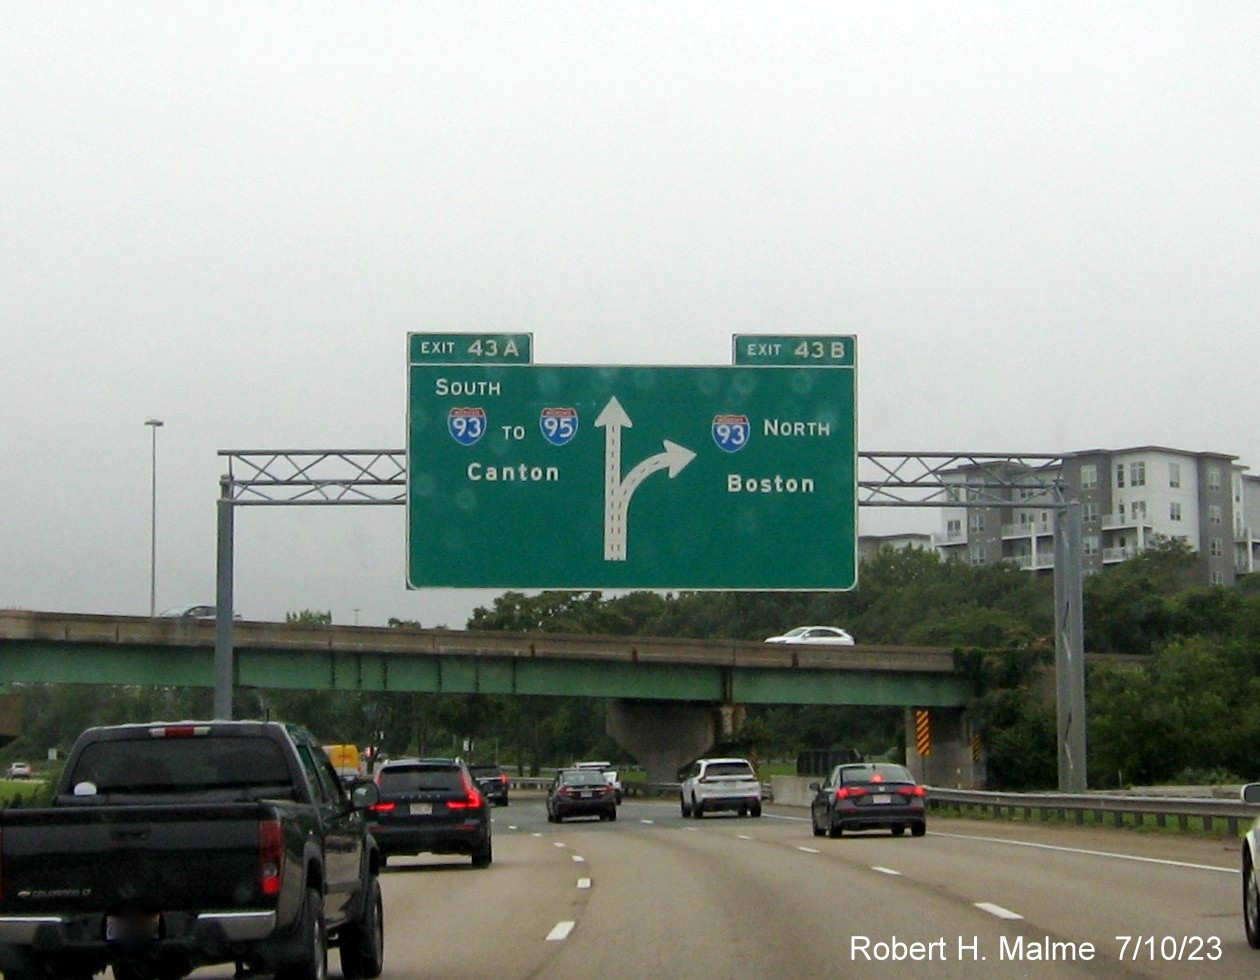  Image of 1/2 mile advance overhead diagrammatic sign for I-93 exits with yellow Old Exit tab removed from left exit tab on MA 3 North in Braintree, July 2023